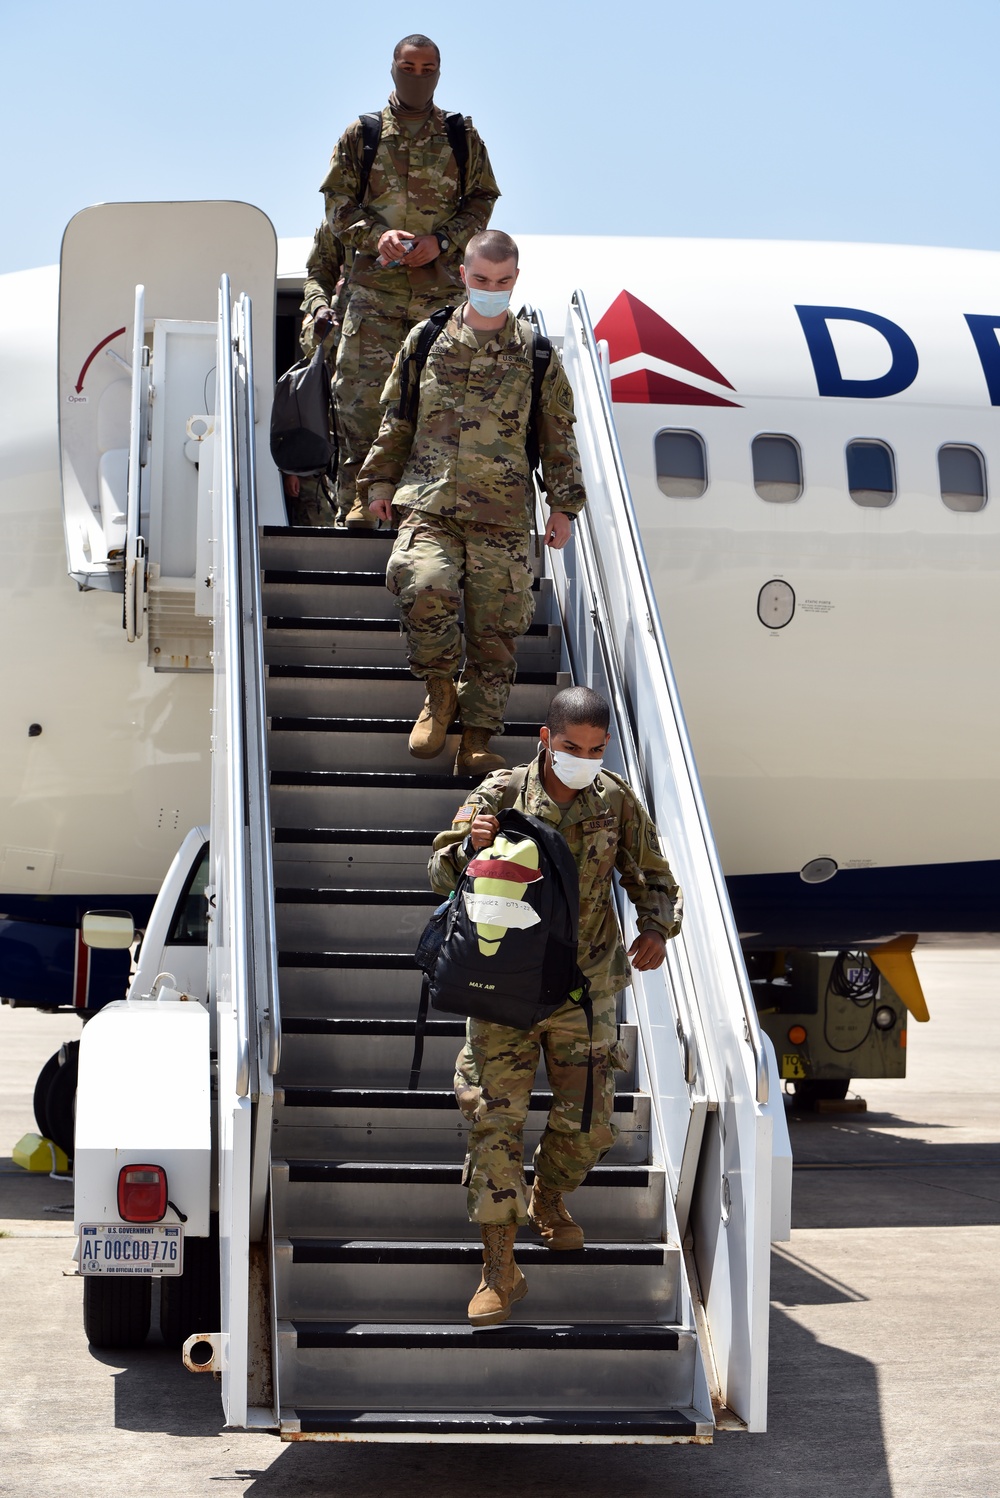 BCT Soldiers transported via contracted commercial airplane to the U.S. Army Medical Center of Excellence